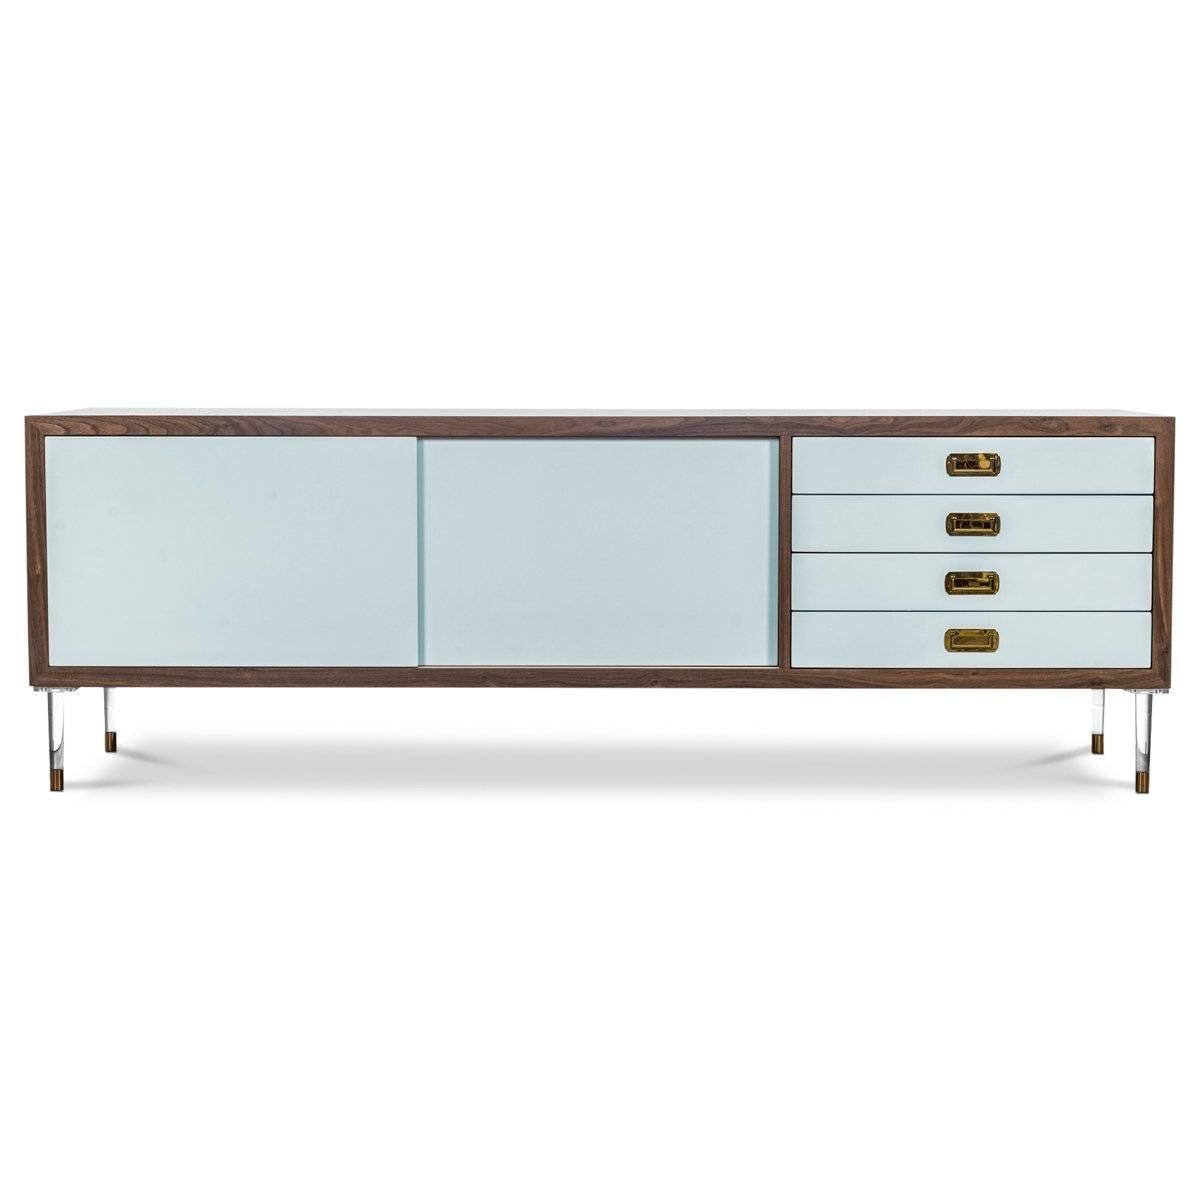 Introducing our new St. Martin Credenza featuring two sliding doors and four drawers to maximize its functionality while still being stylish and chic. This retro-modern design features an oiled walnut trim, brass hardware, our famous Capri Blue